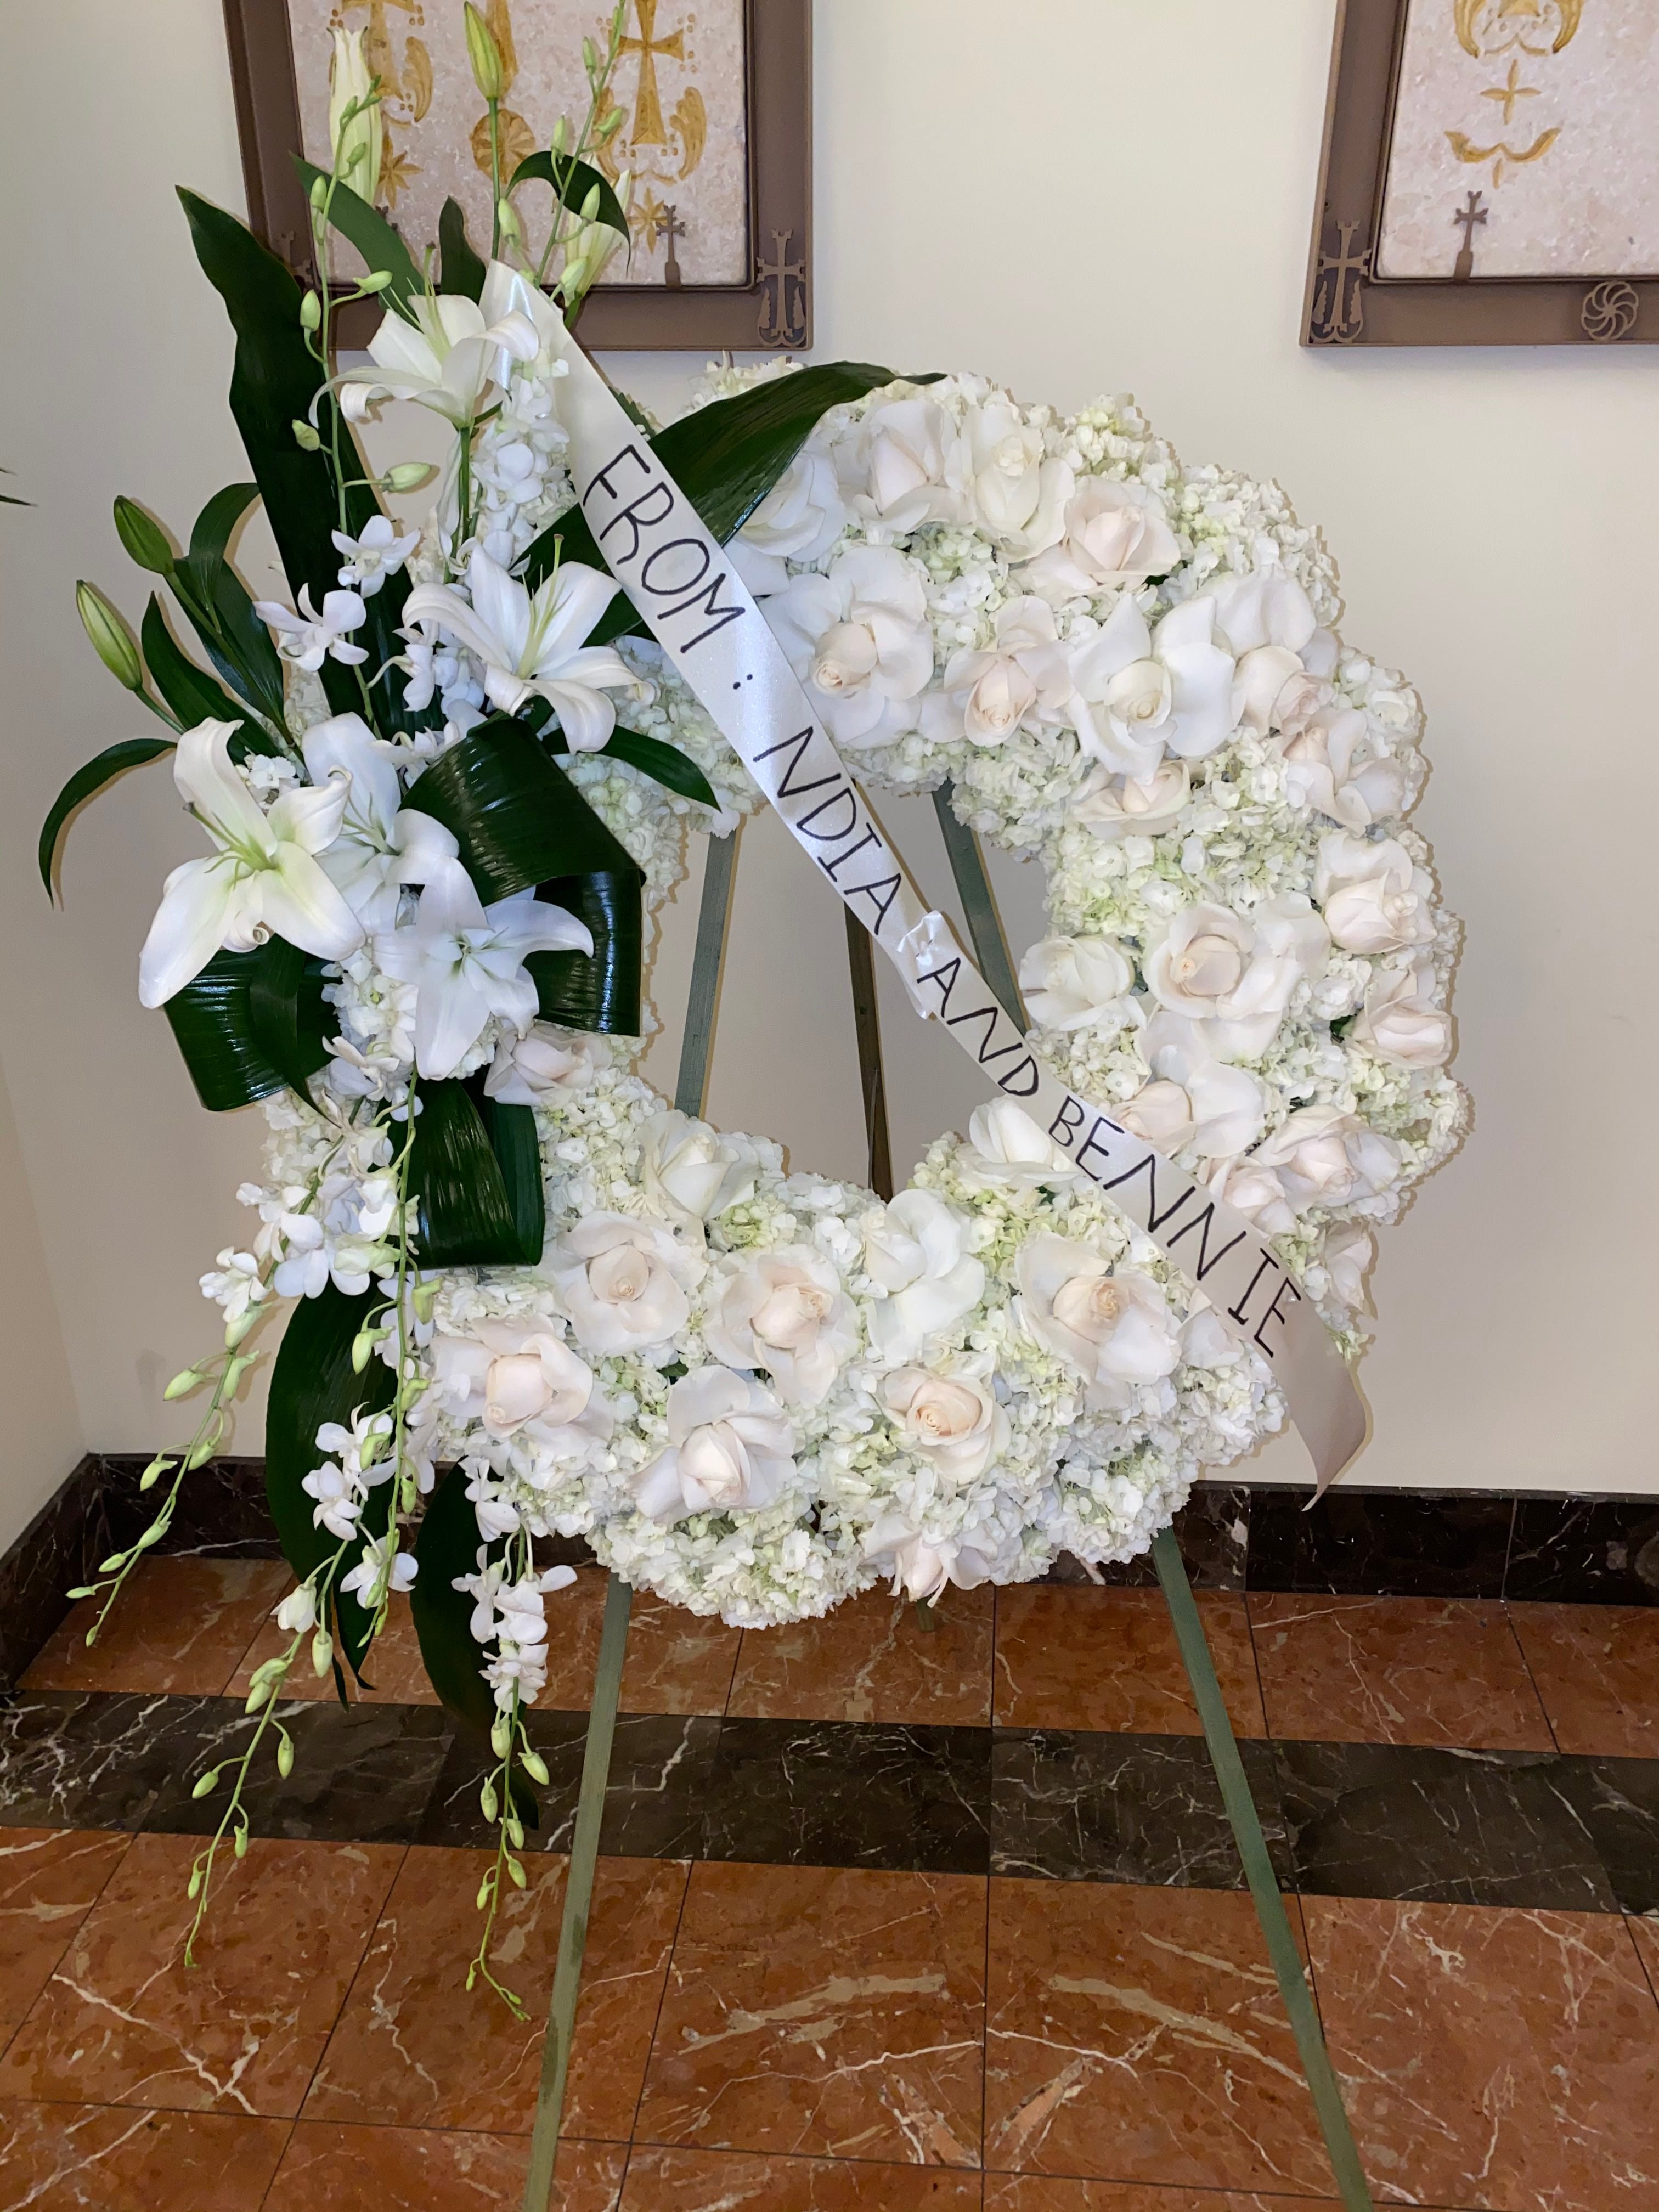 Send funeral flowers delivery Manila Philippines | Flower delivery, Online flower  delivery, Funeral flowers